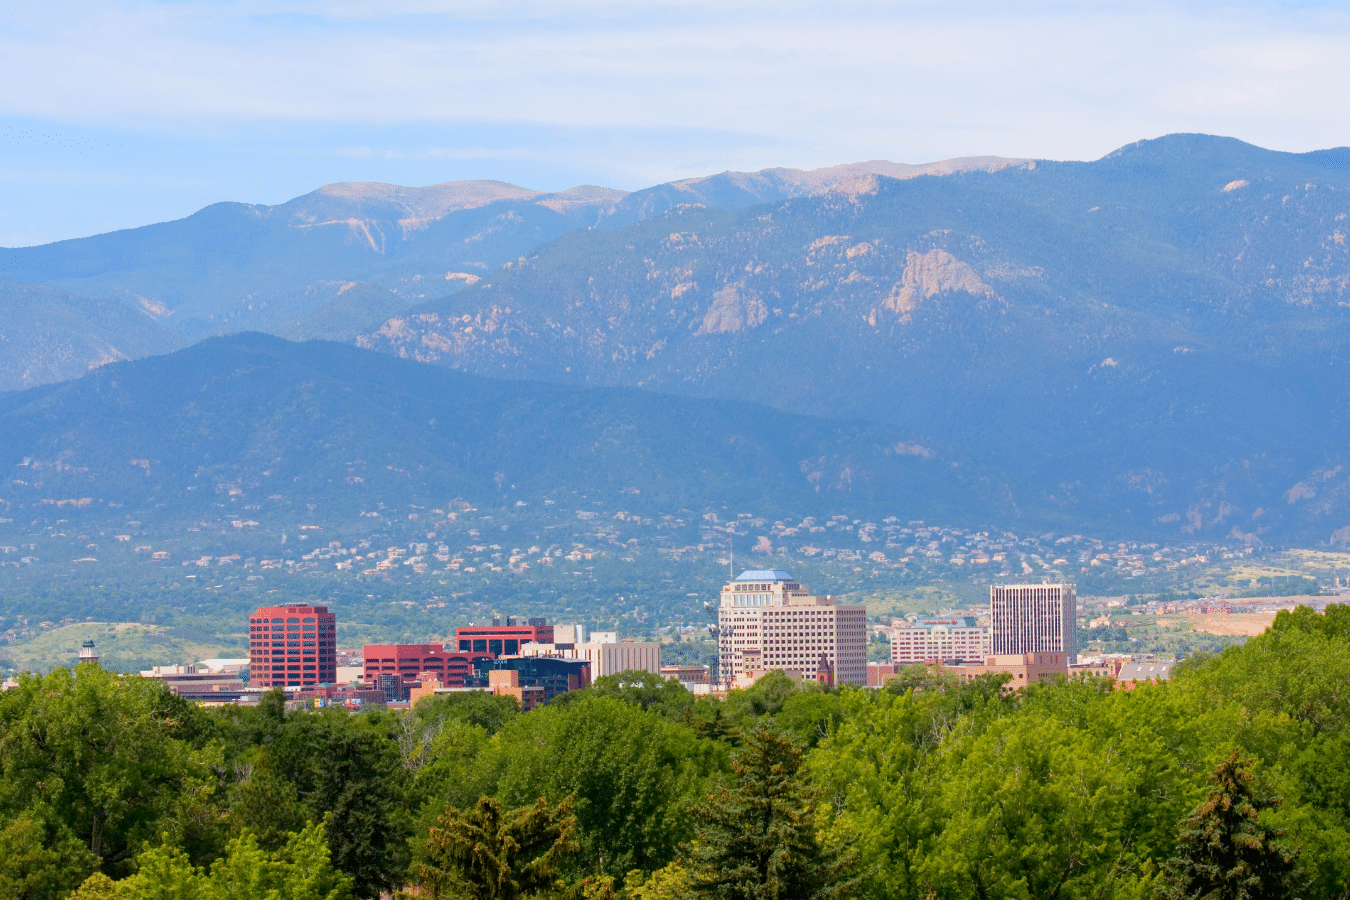 Colorado Springs Rockies during the day time with the mountains in the backgroudn